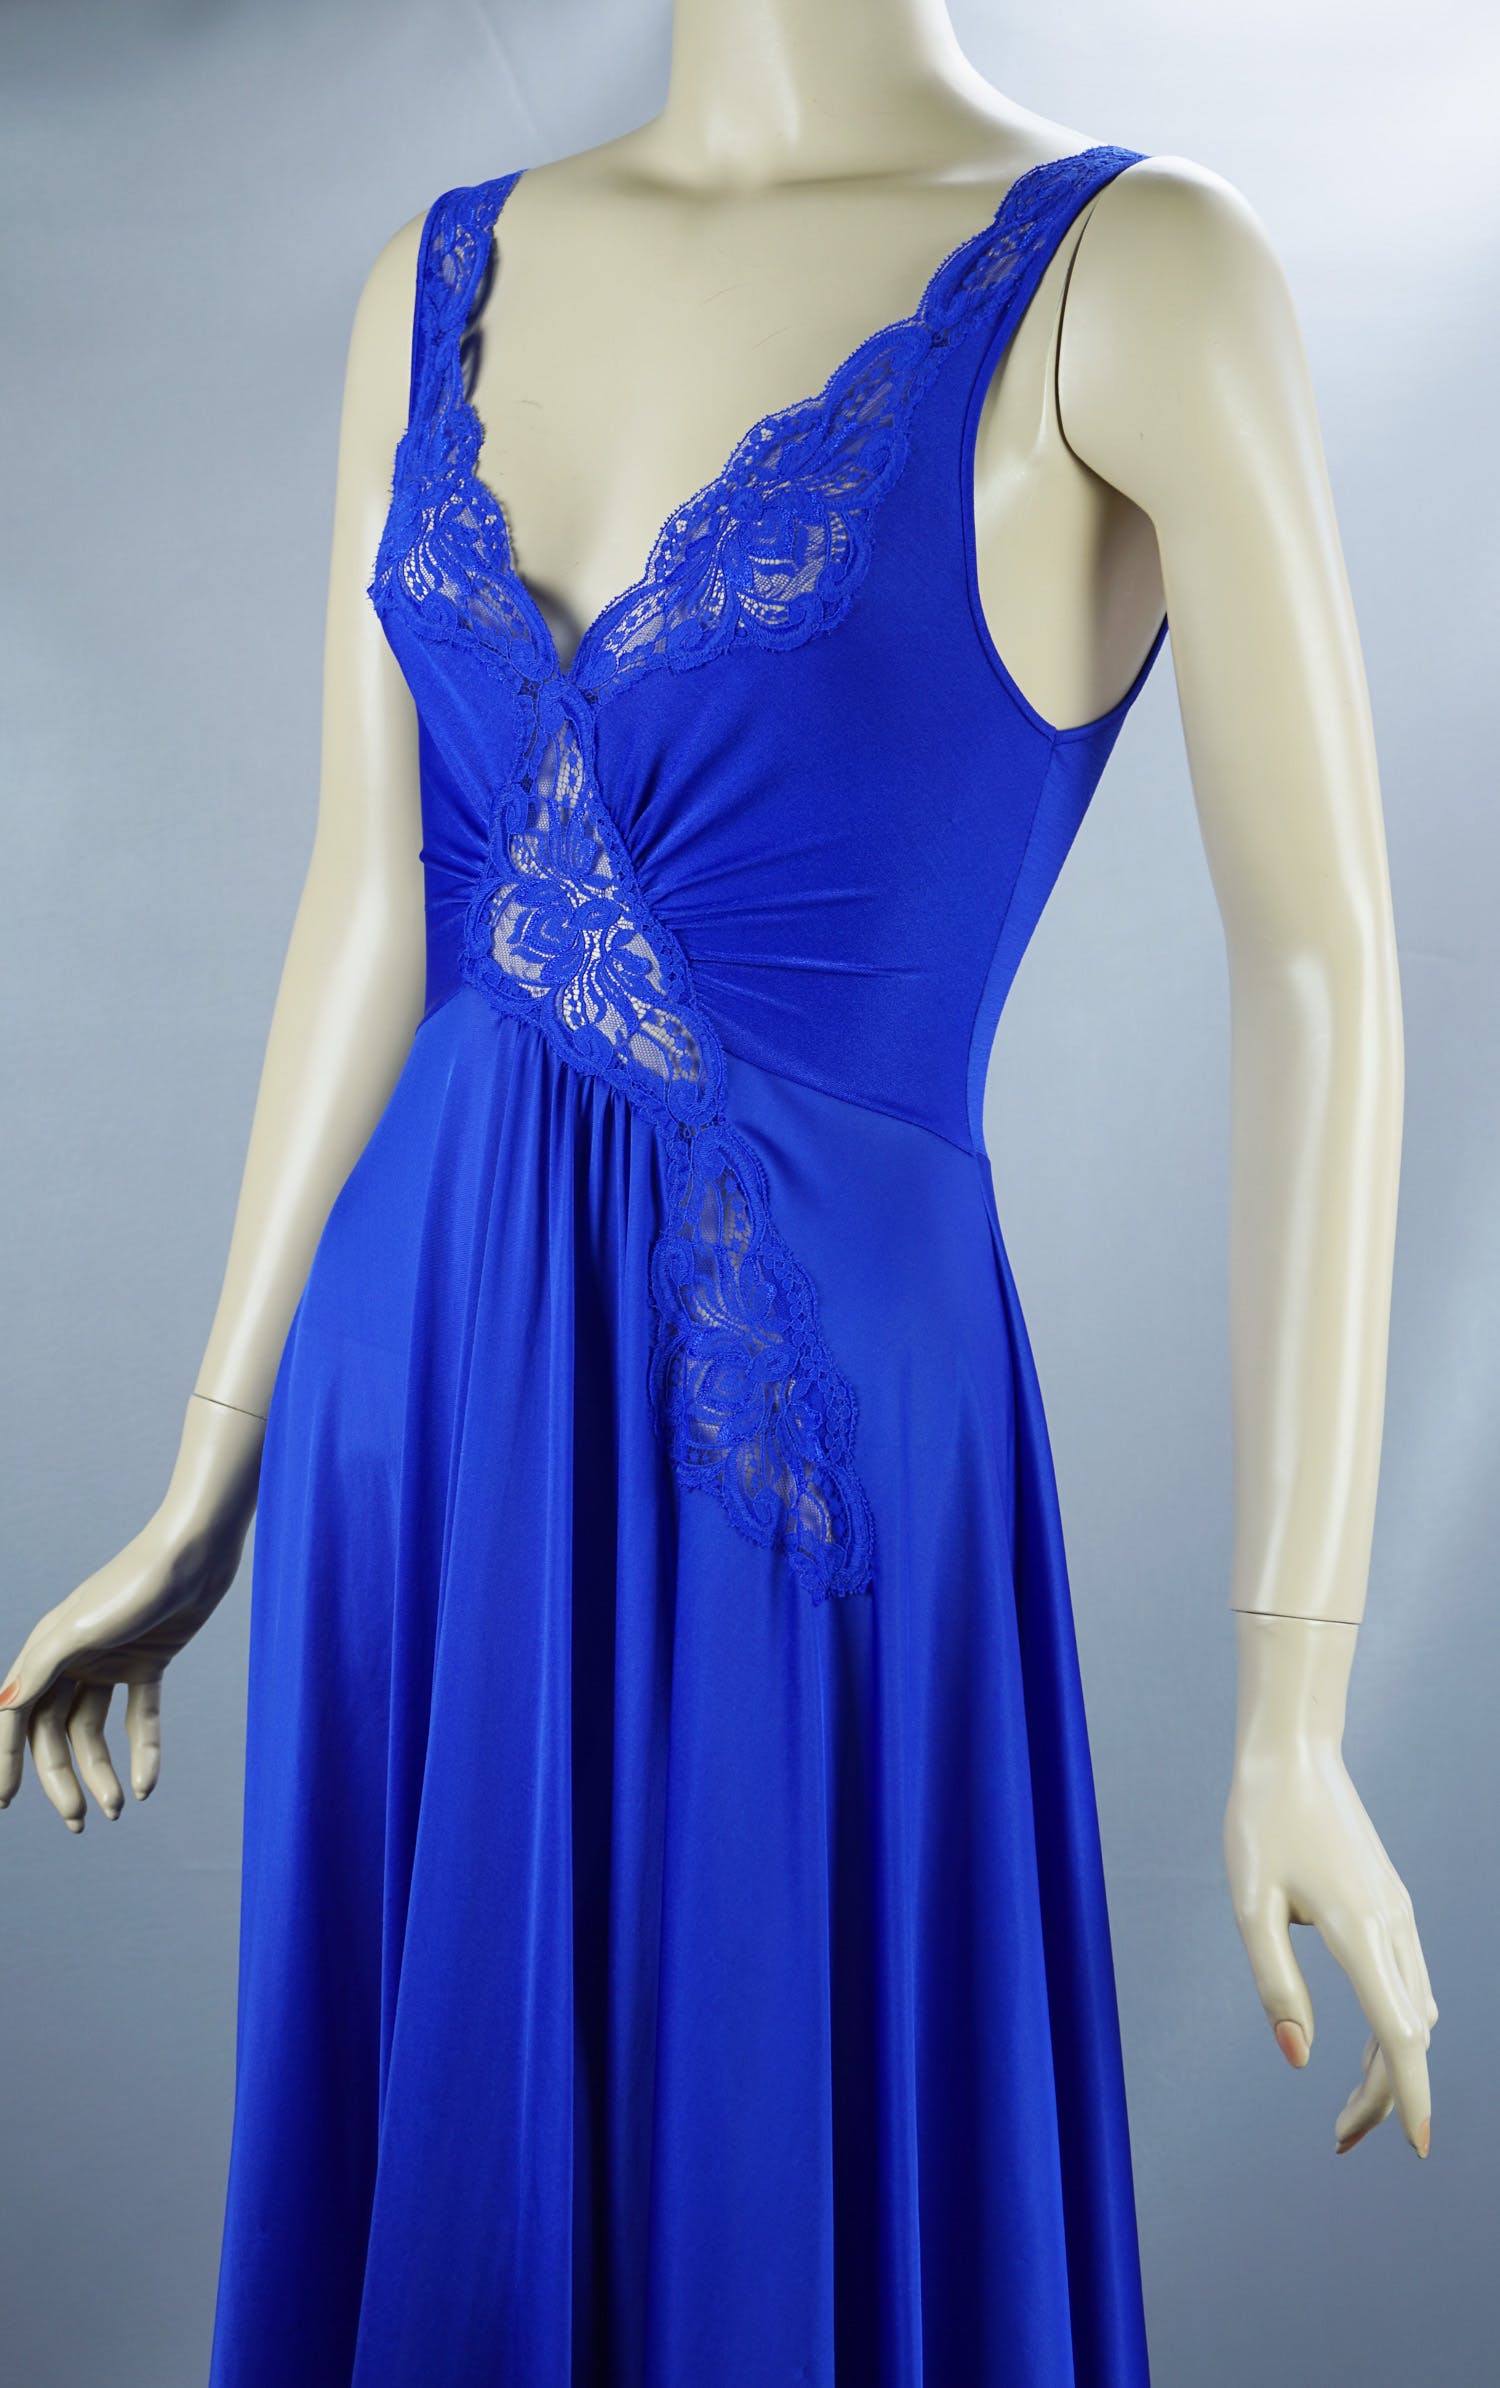 Vintage 80s Blue With Lace Detail Full Sweep Nightgown By Olga